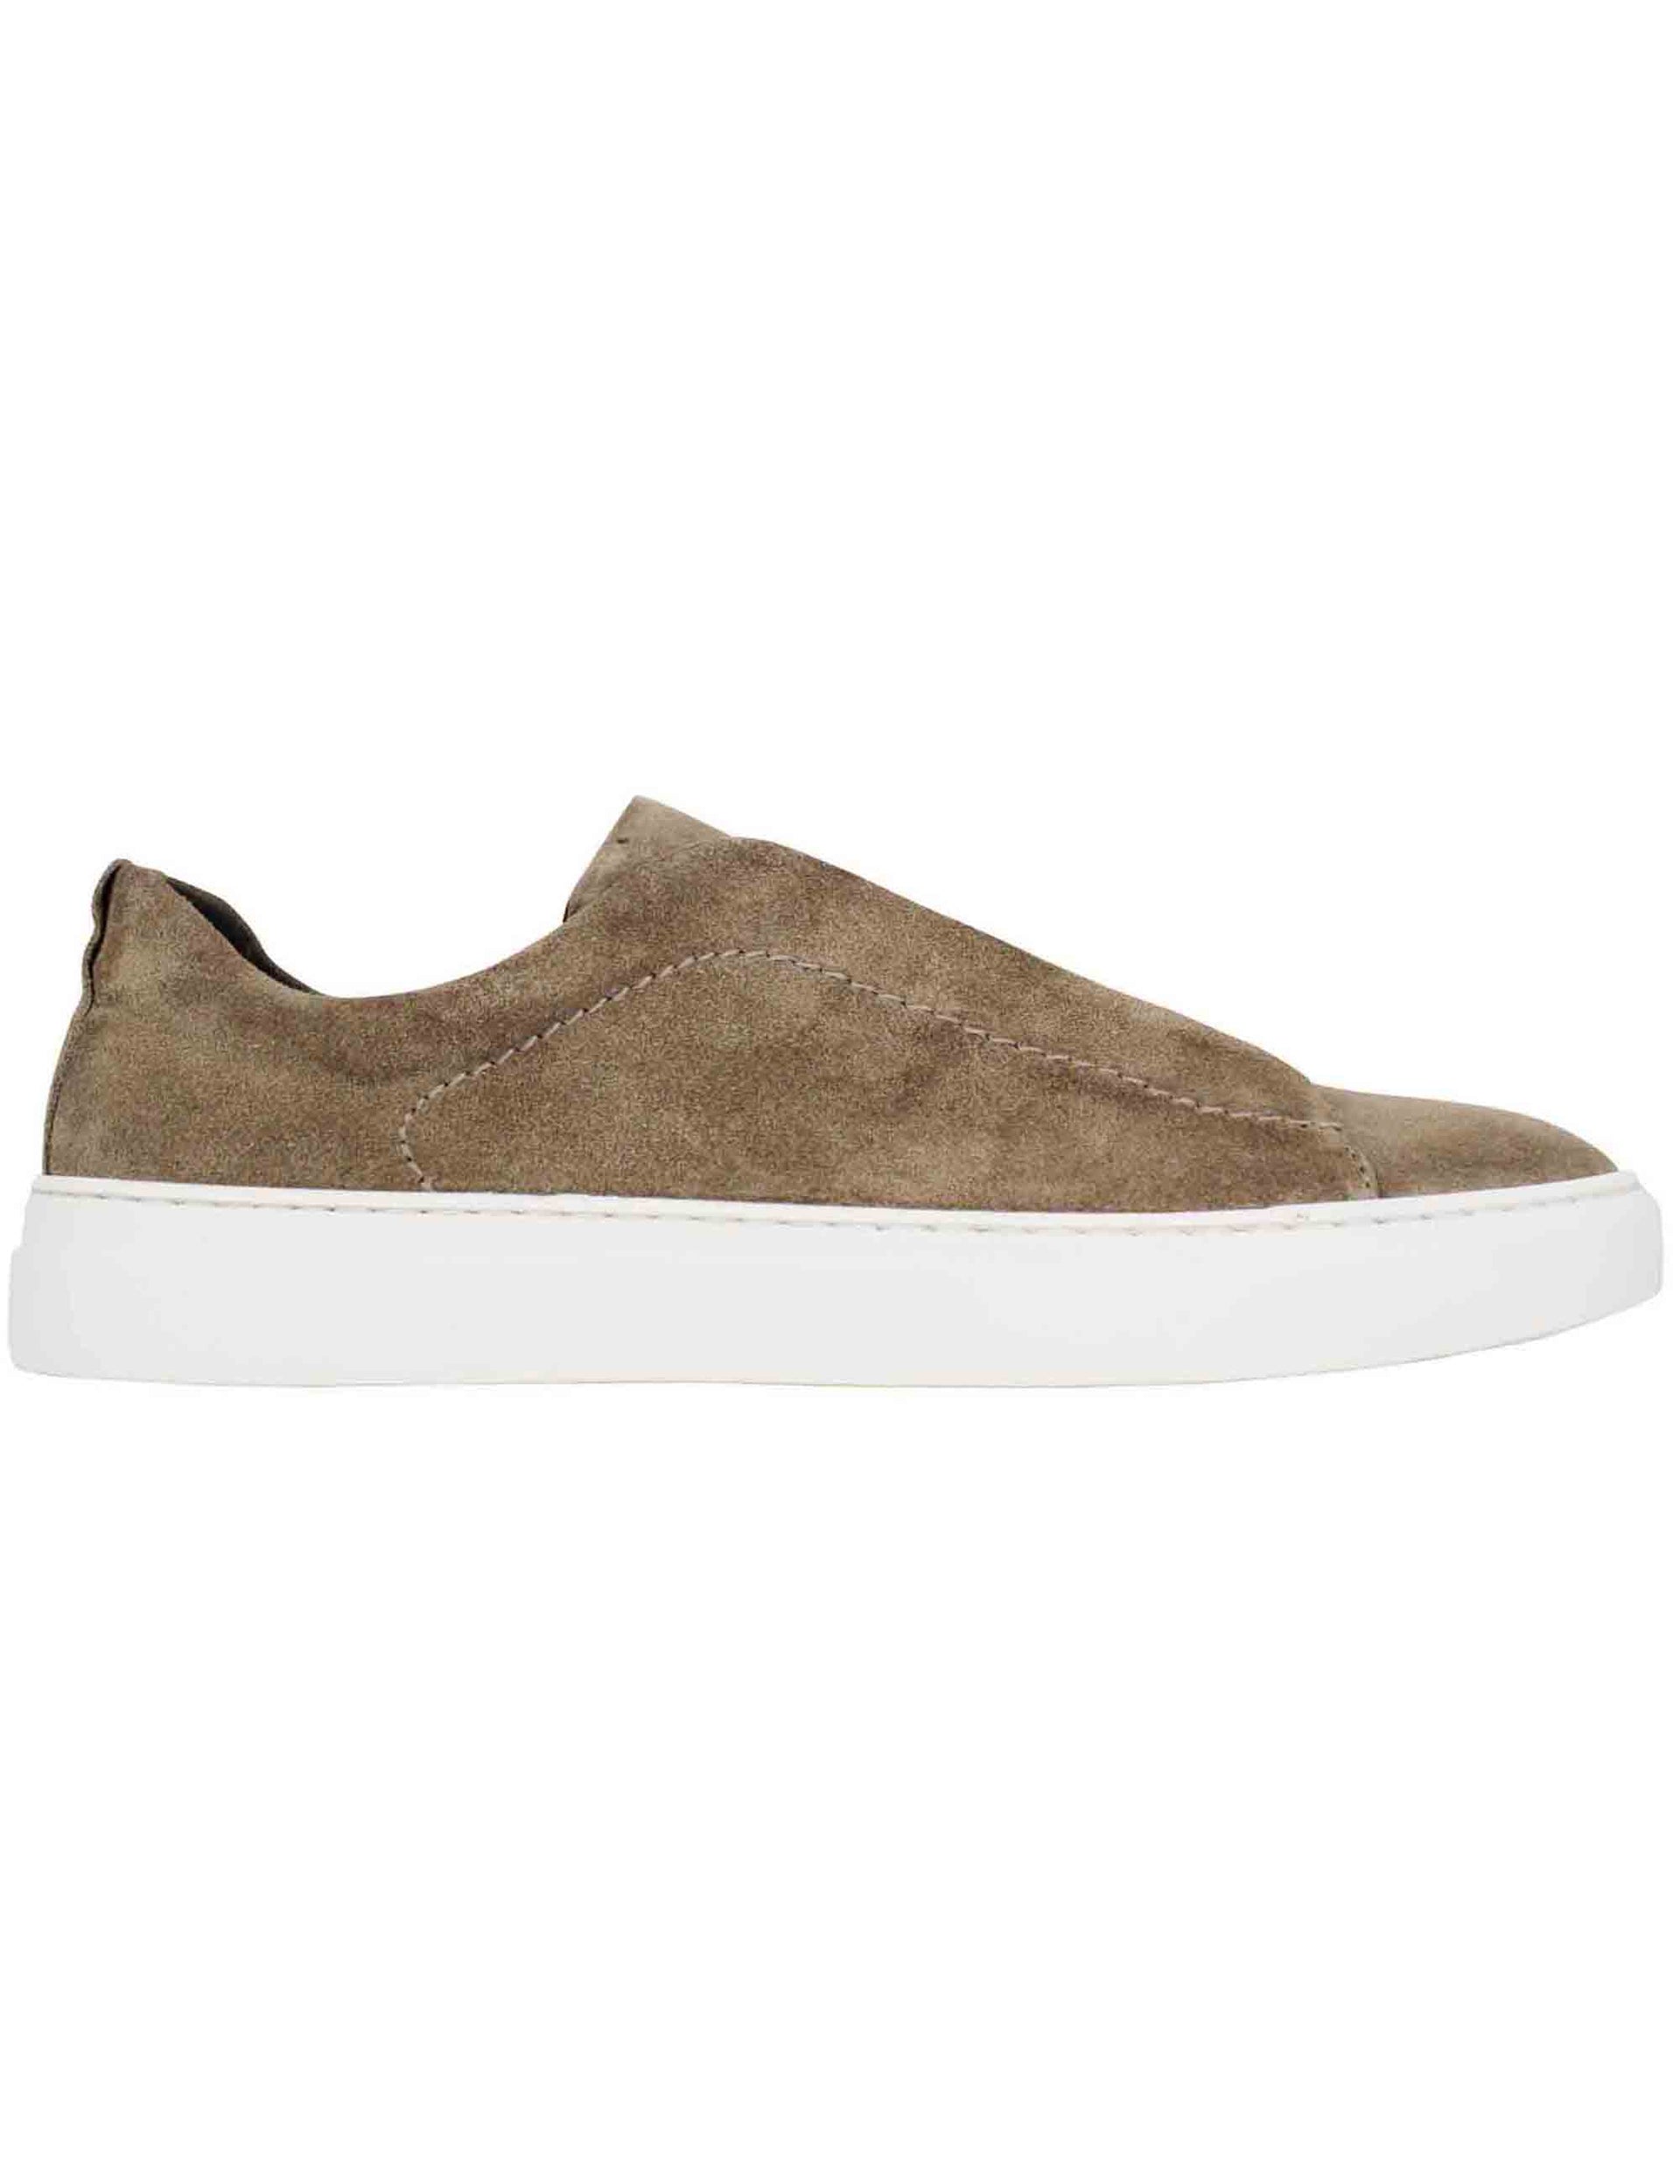 Men's sneakers in taupe suede with elastic bands